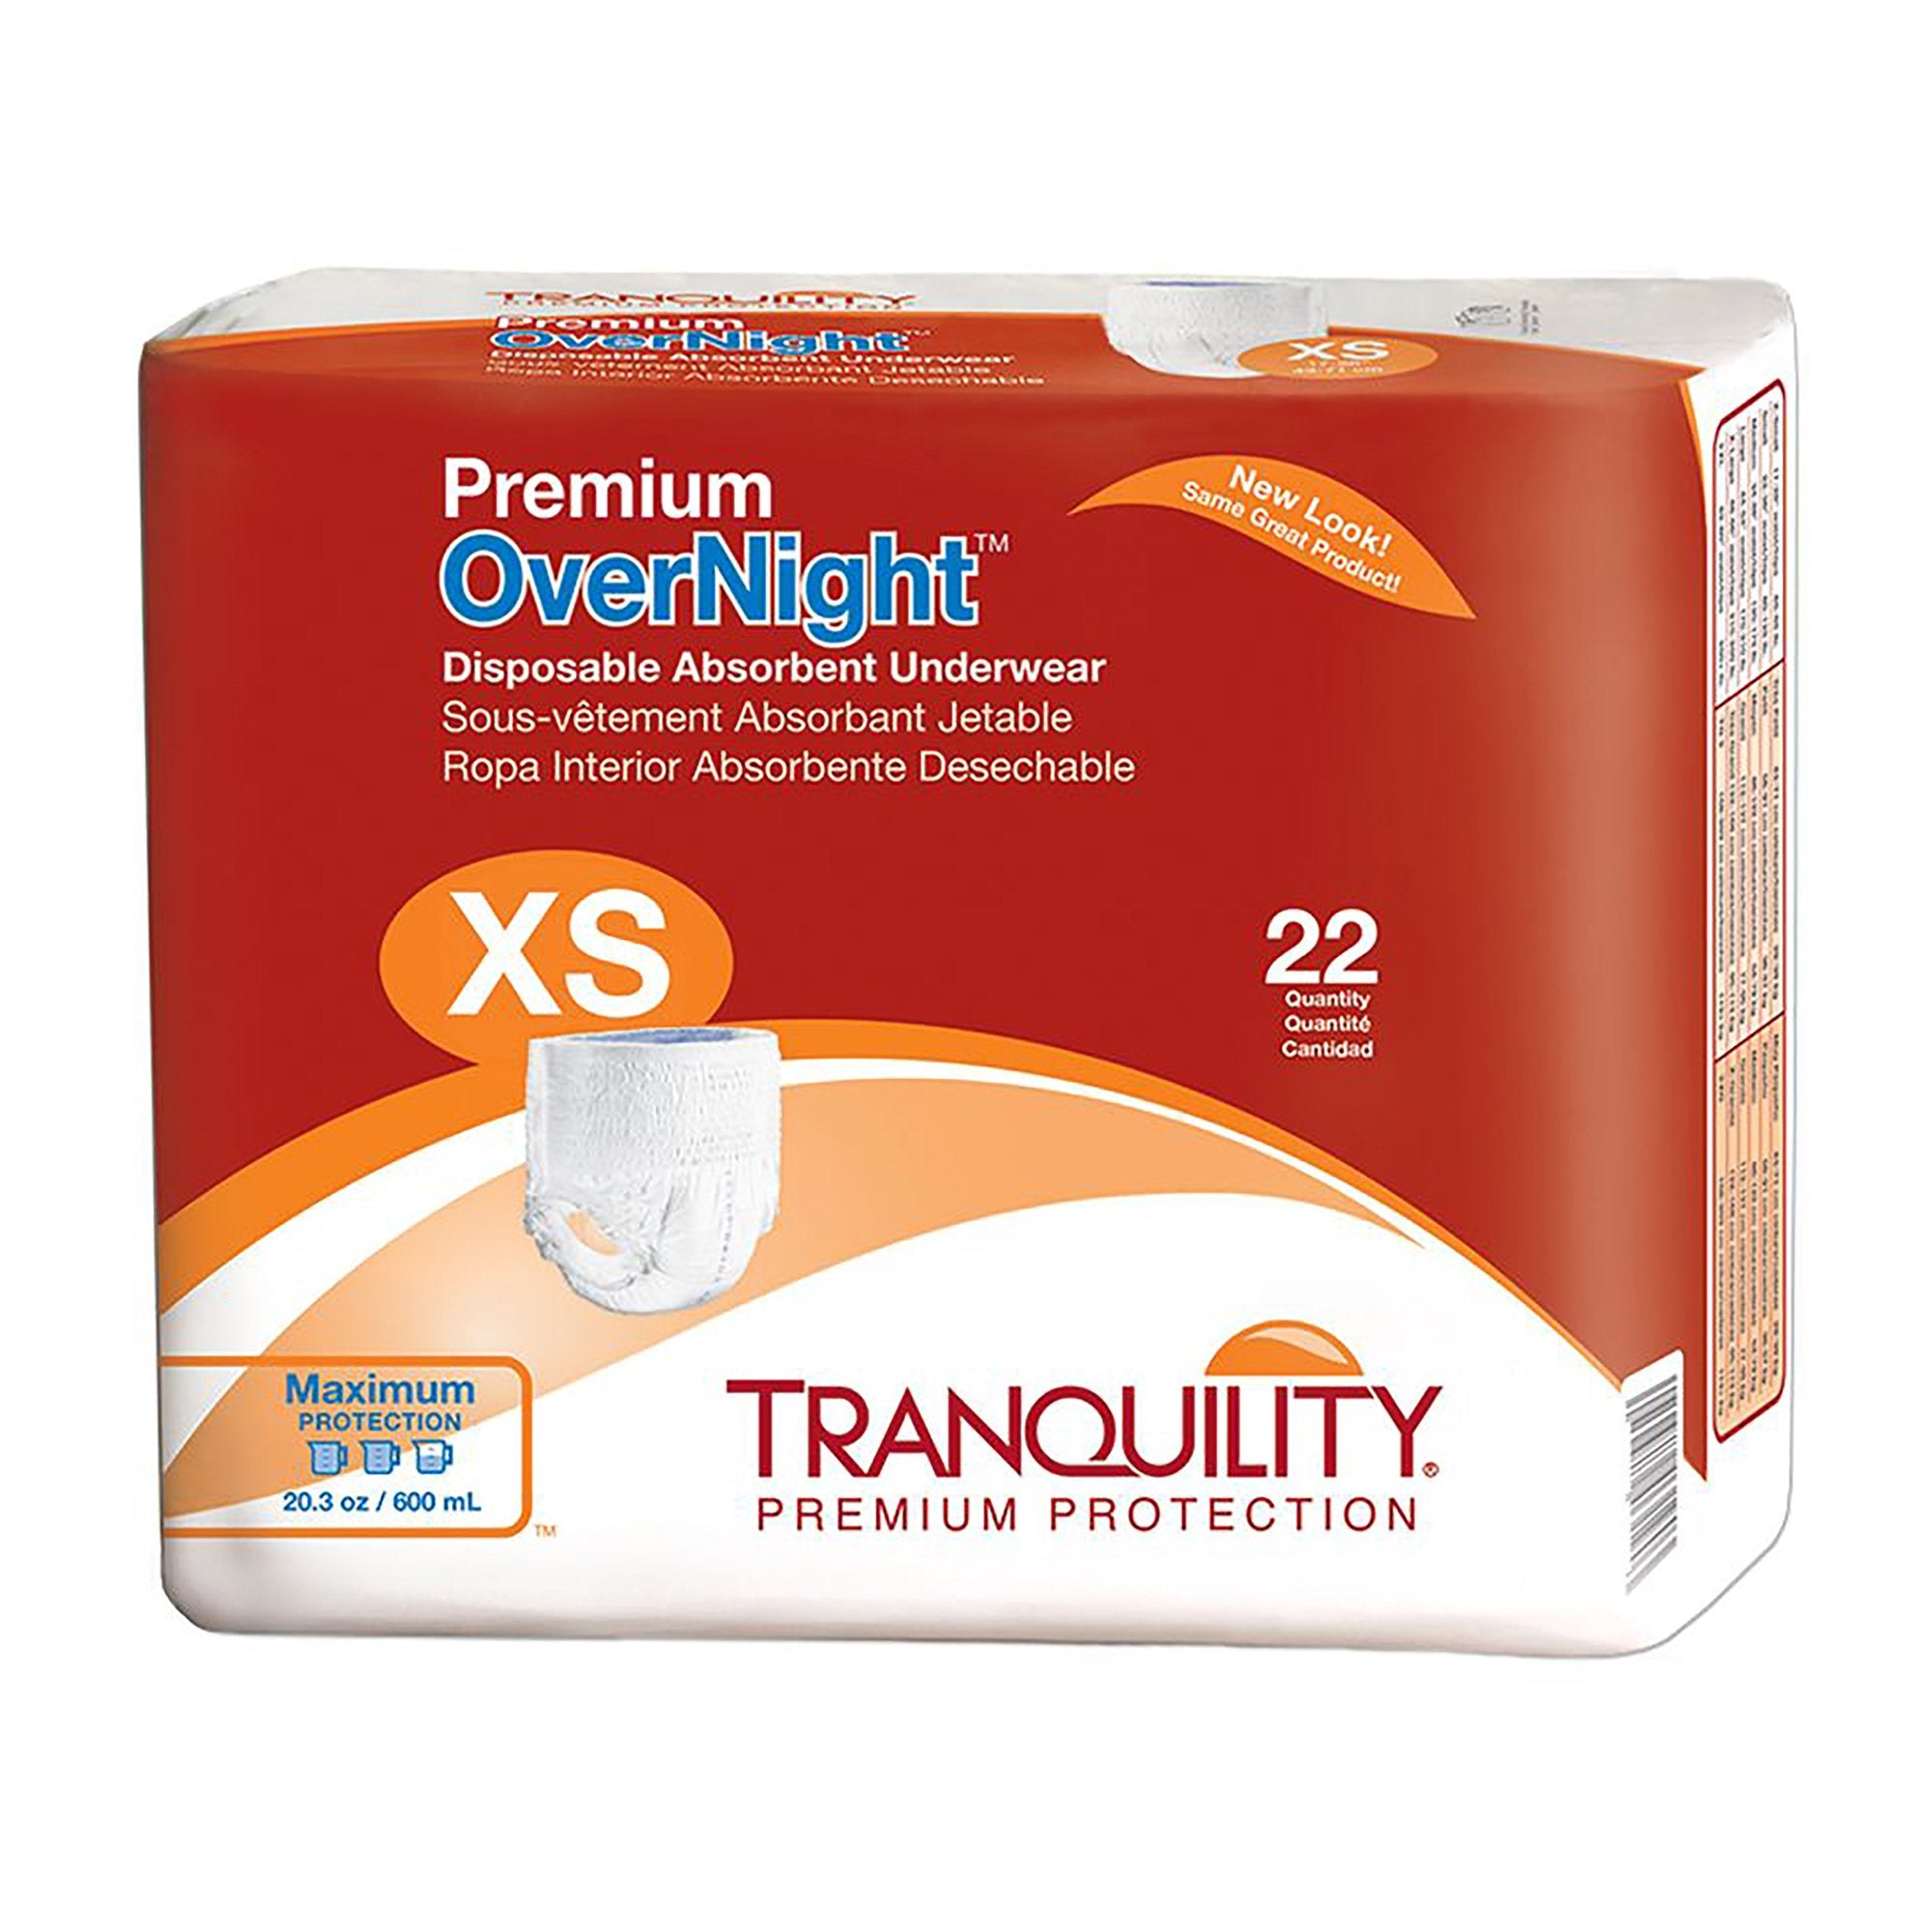 Tranquility? Premium OverNight? Maximum Protection Absorbent Underwear, Extra Small